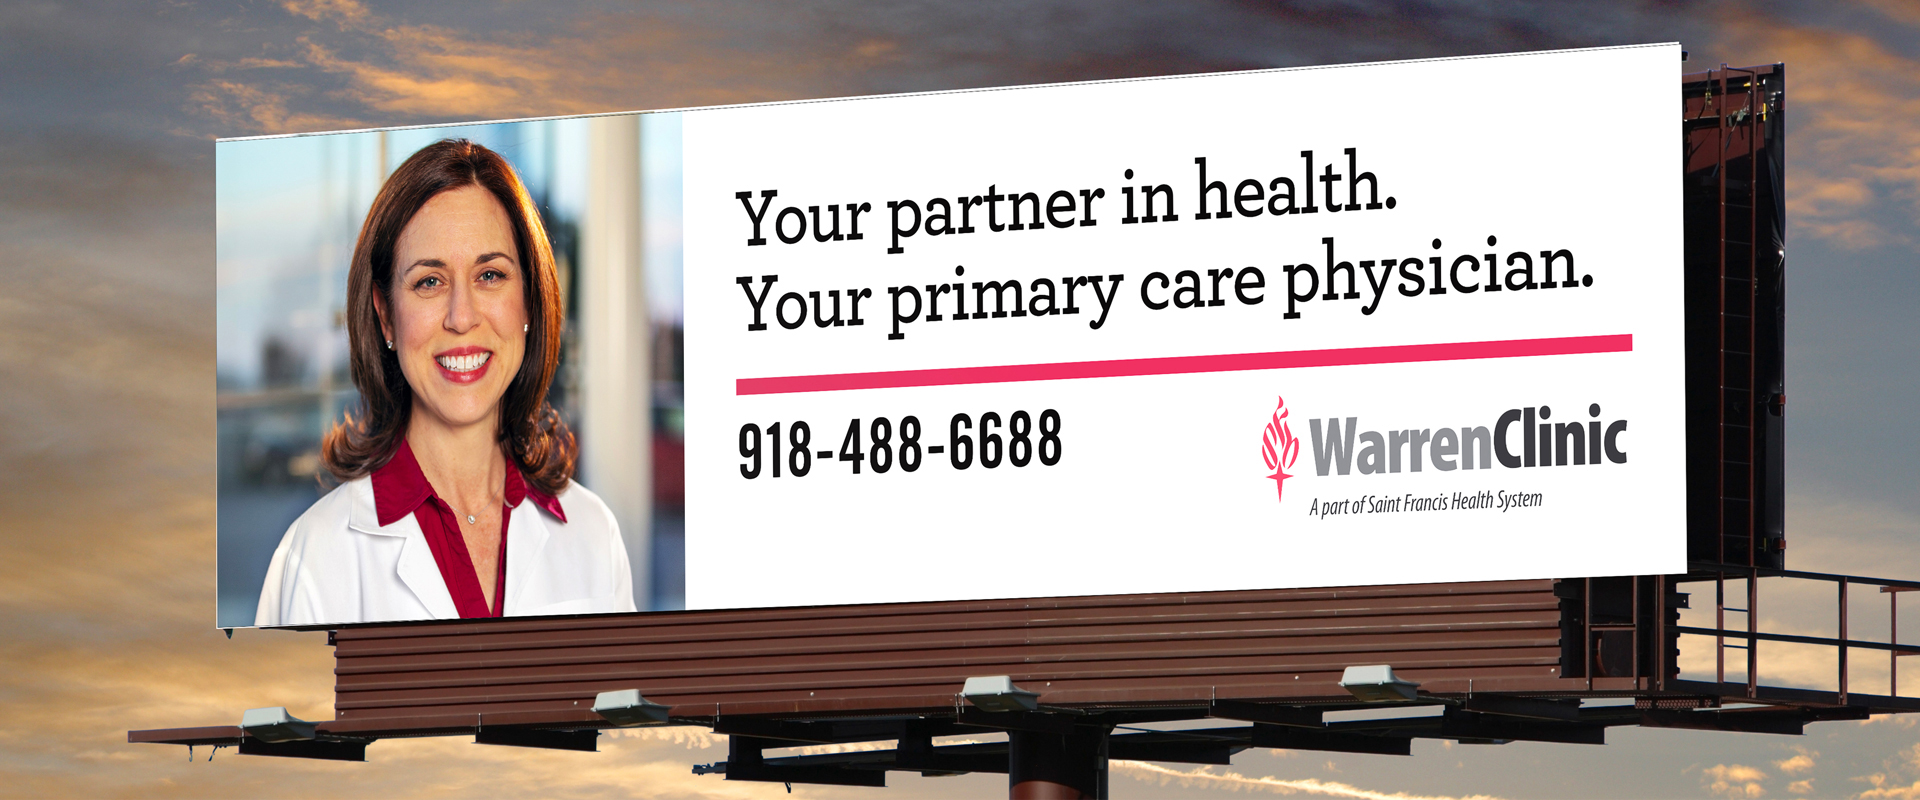 A billboard for Saint Francis Health System designed by AcrobatAnt.